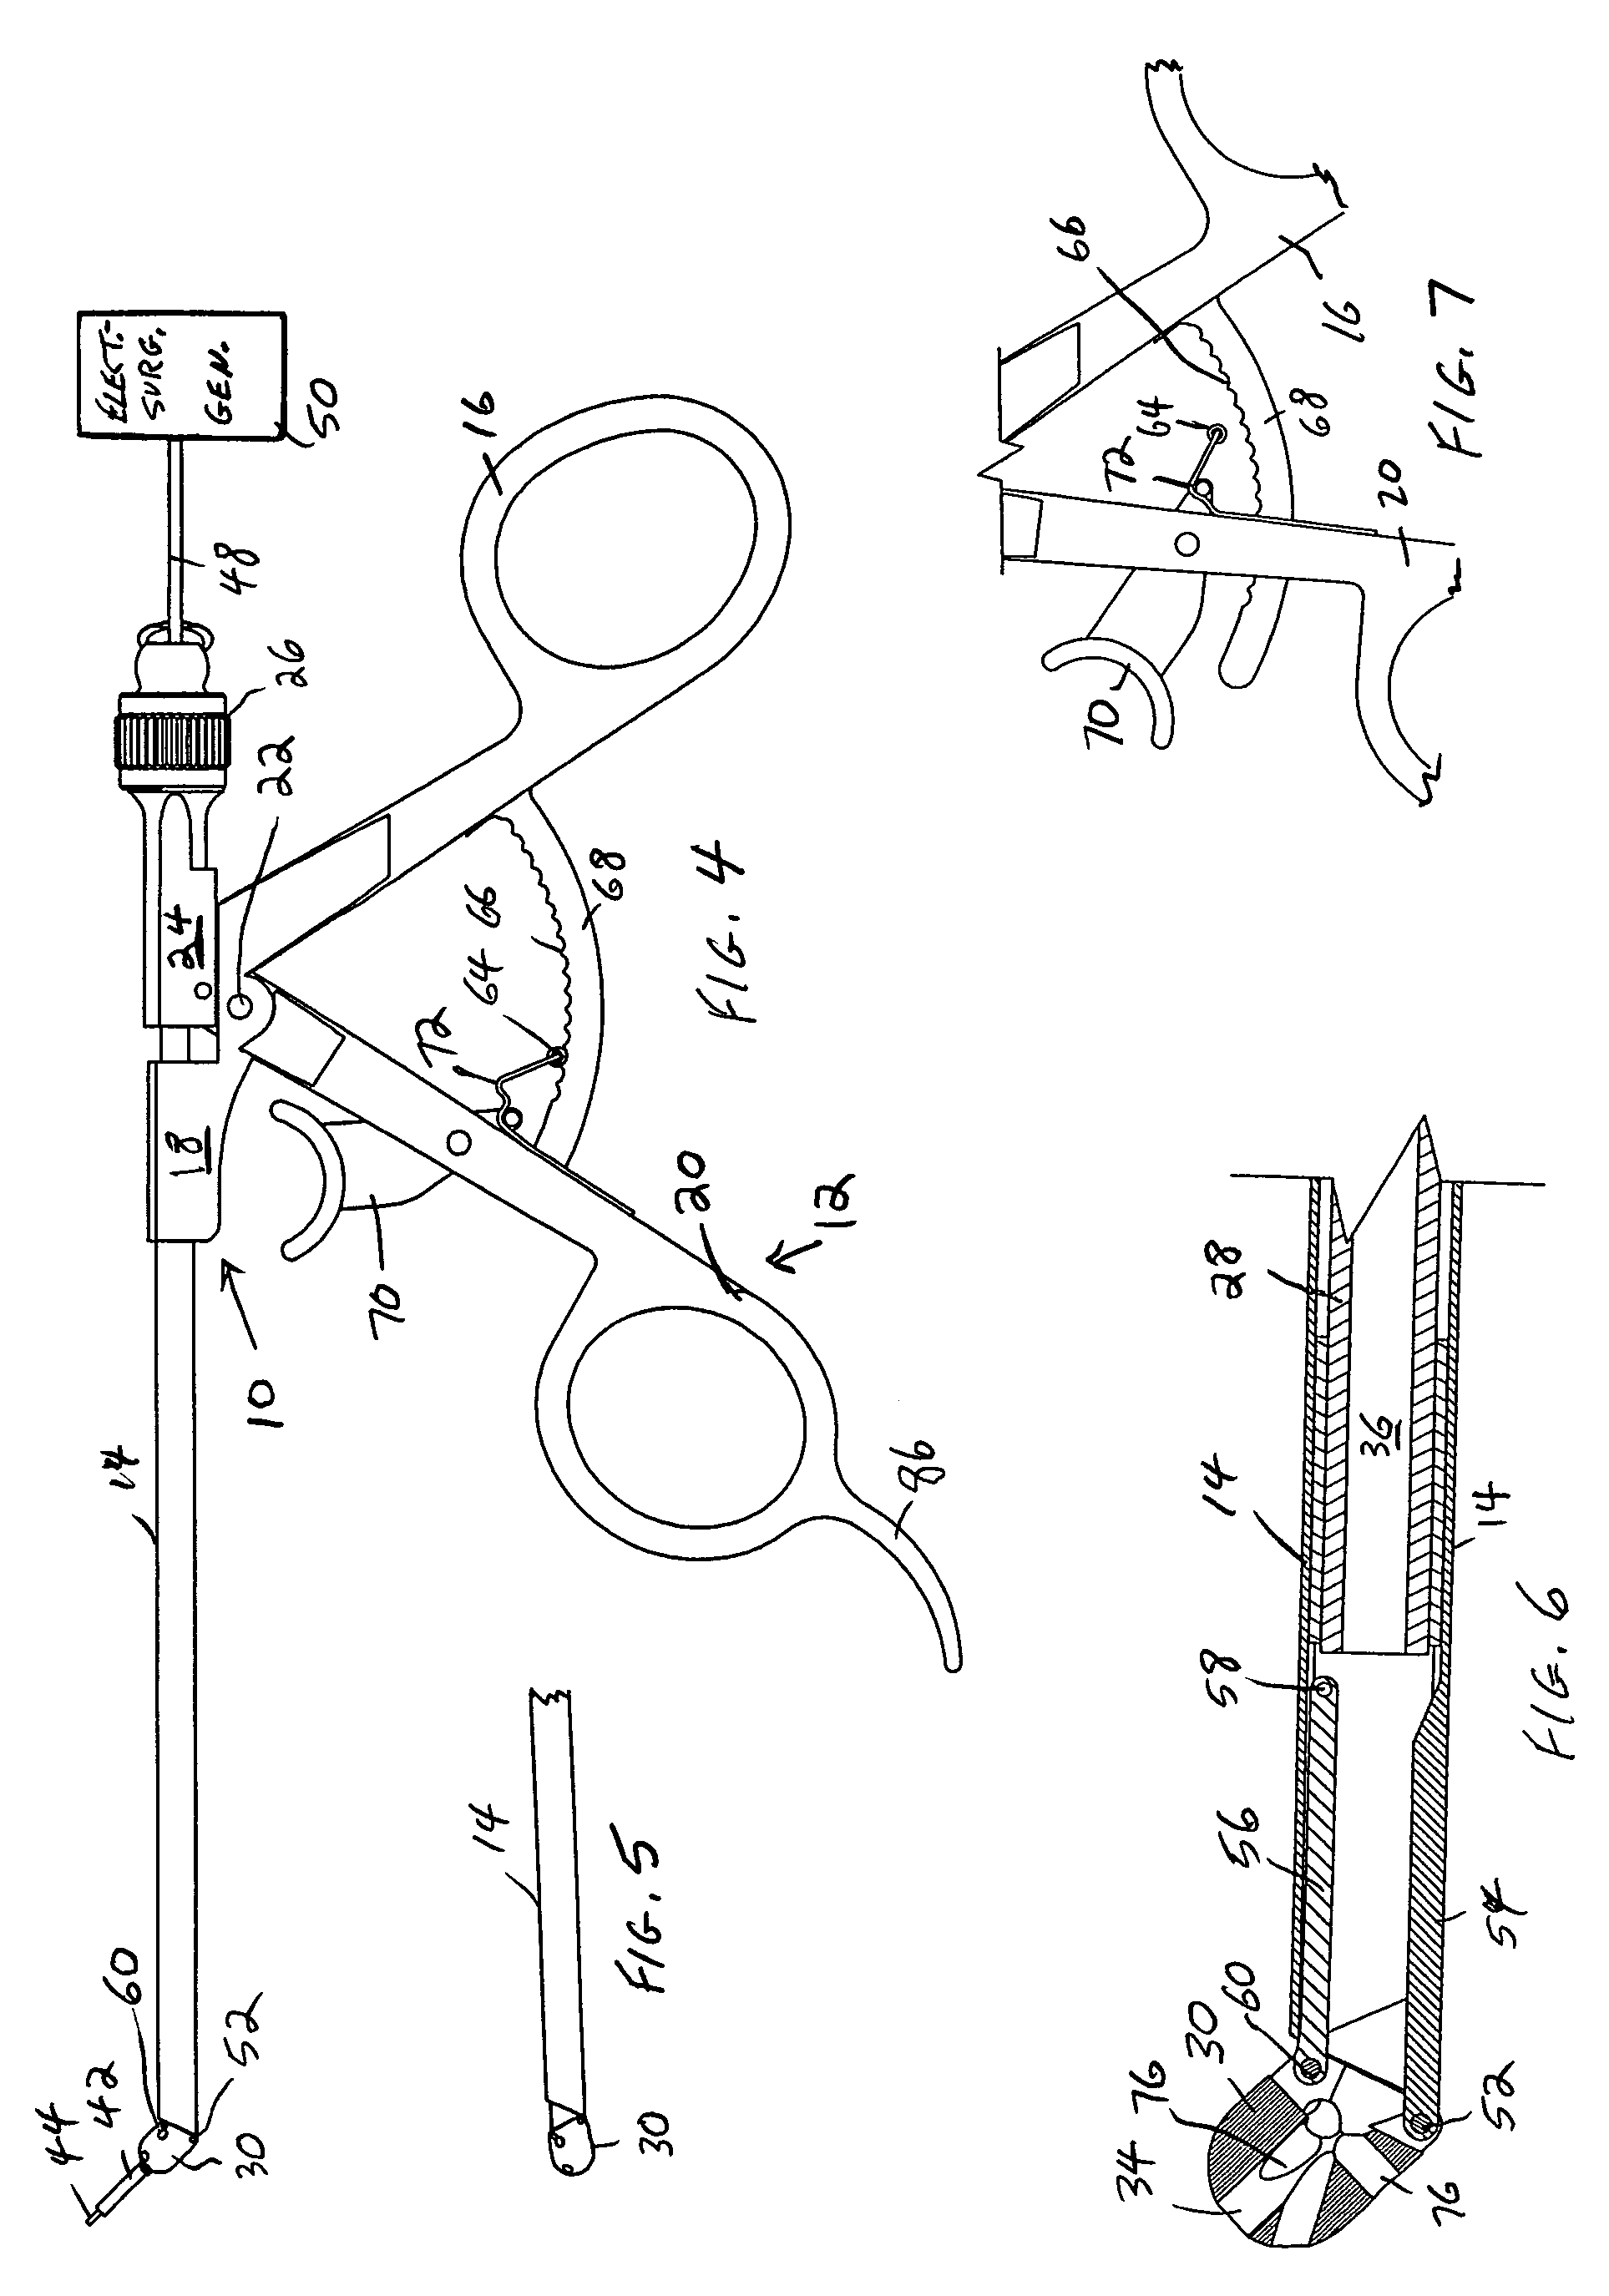 Flexible electrosurgical electrode with manipulator